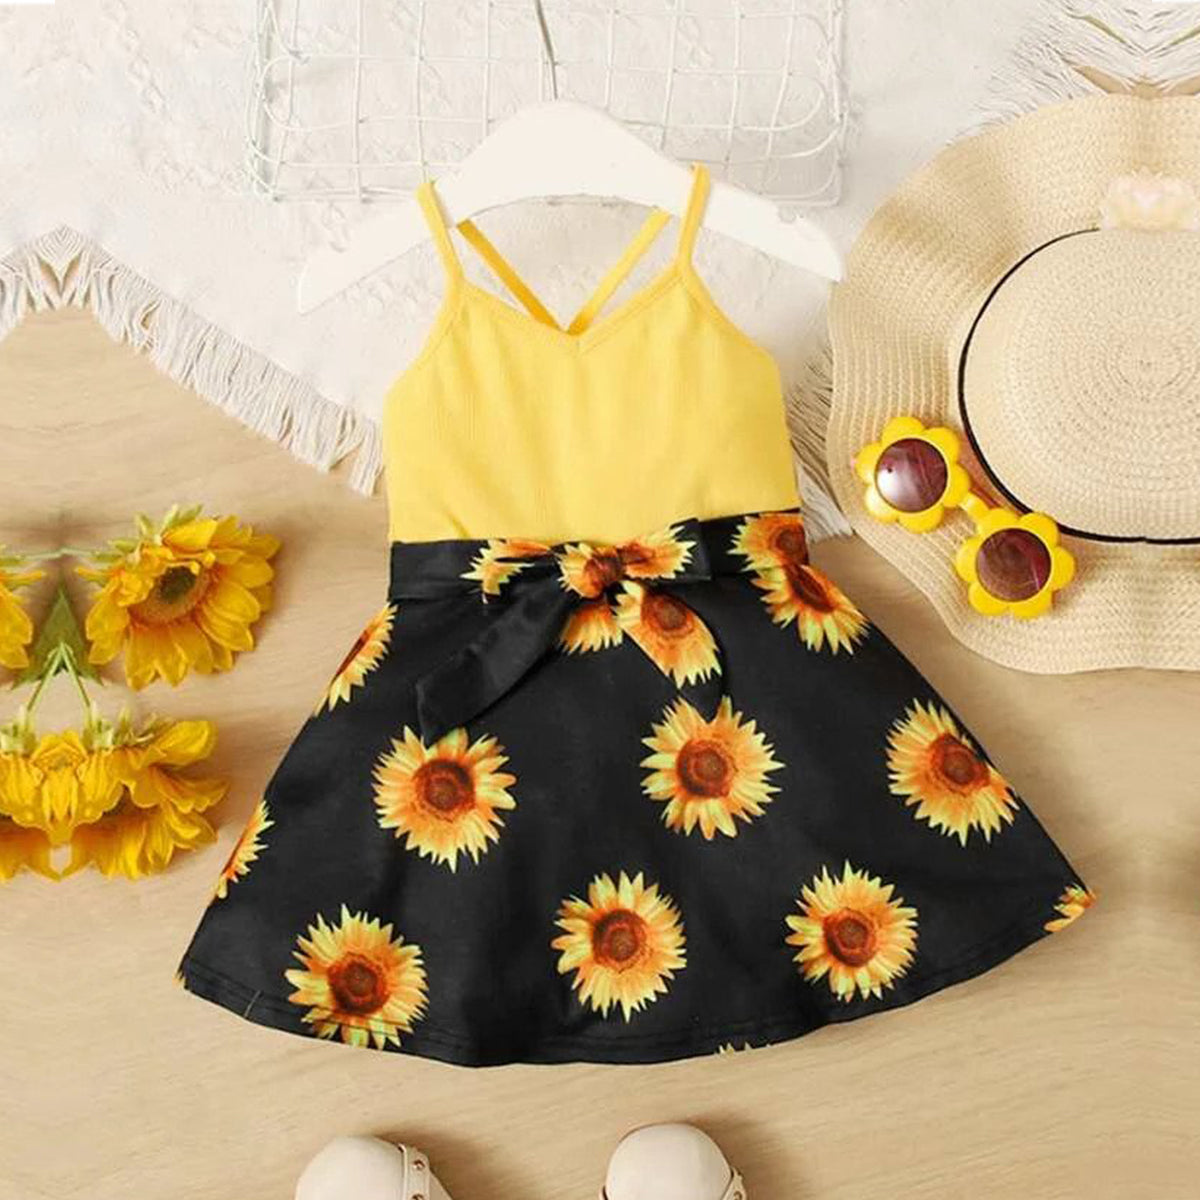 BabyGirl's Stylish Cotton Yellow SunFlower Cami Frocks & Dresses for Kids.